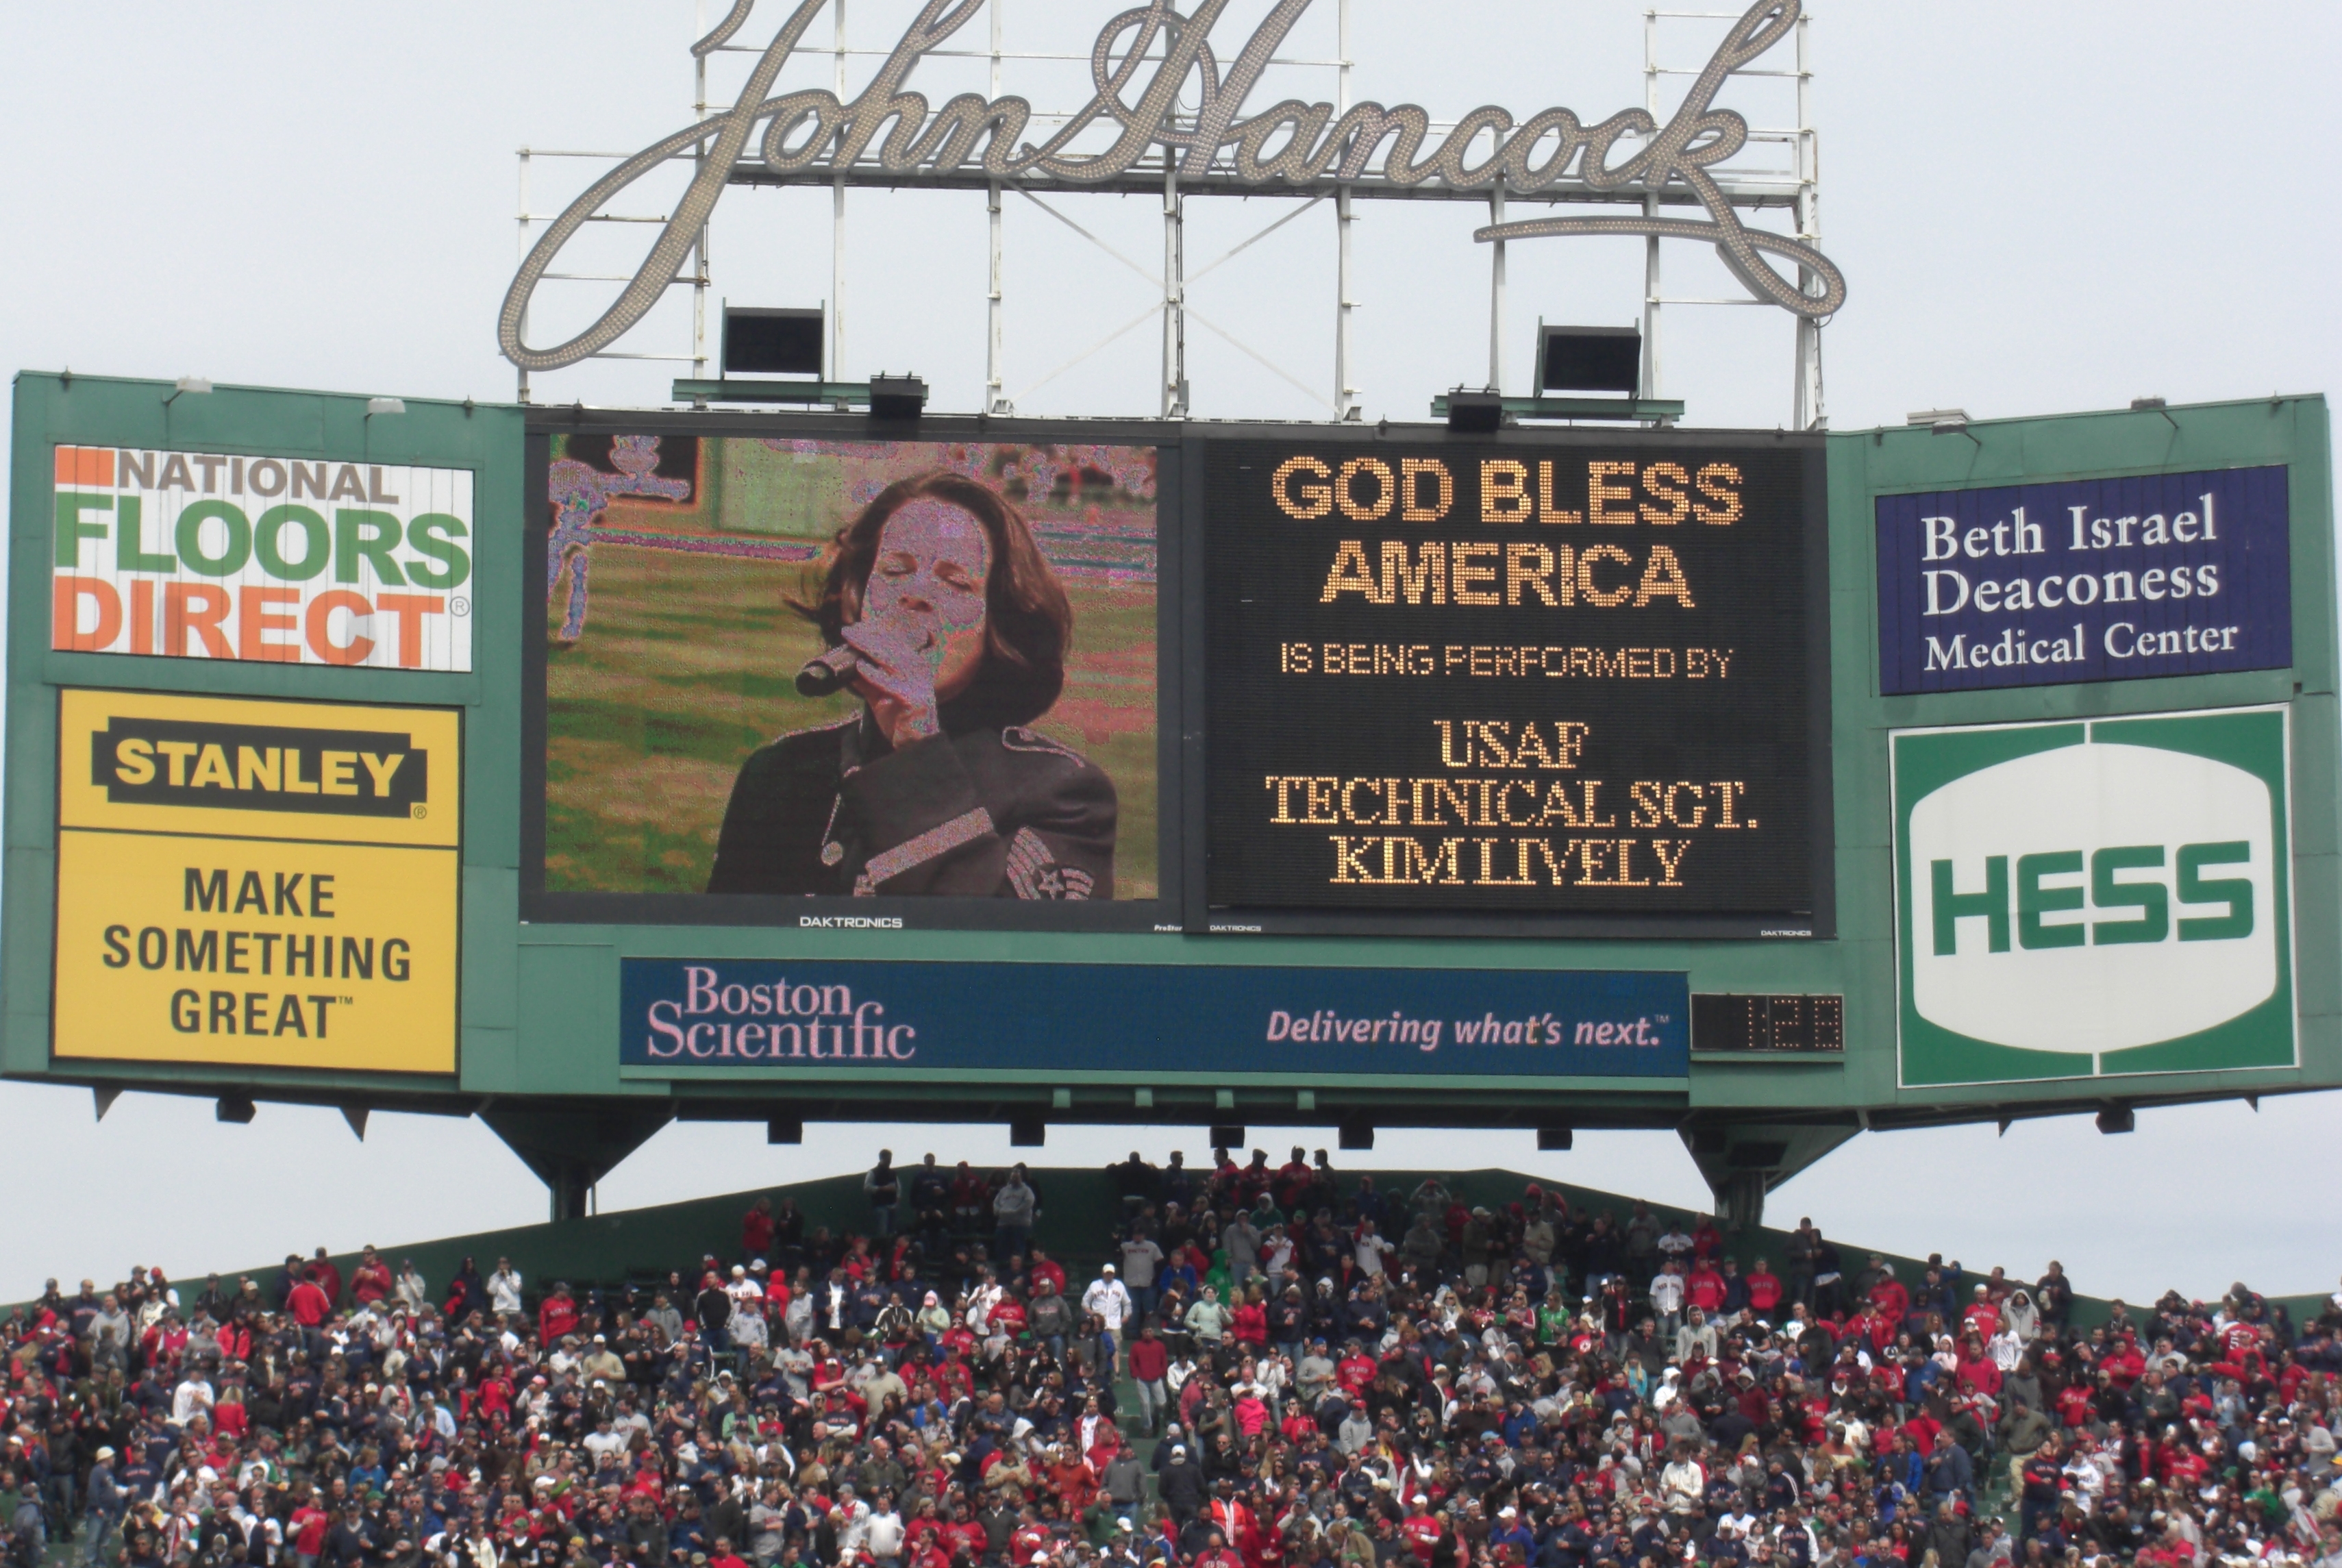 TSgt Kim Lively performs at Fenway Park, Boston, MA > Air Force